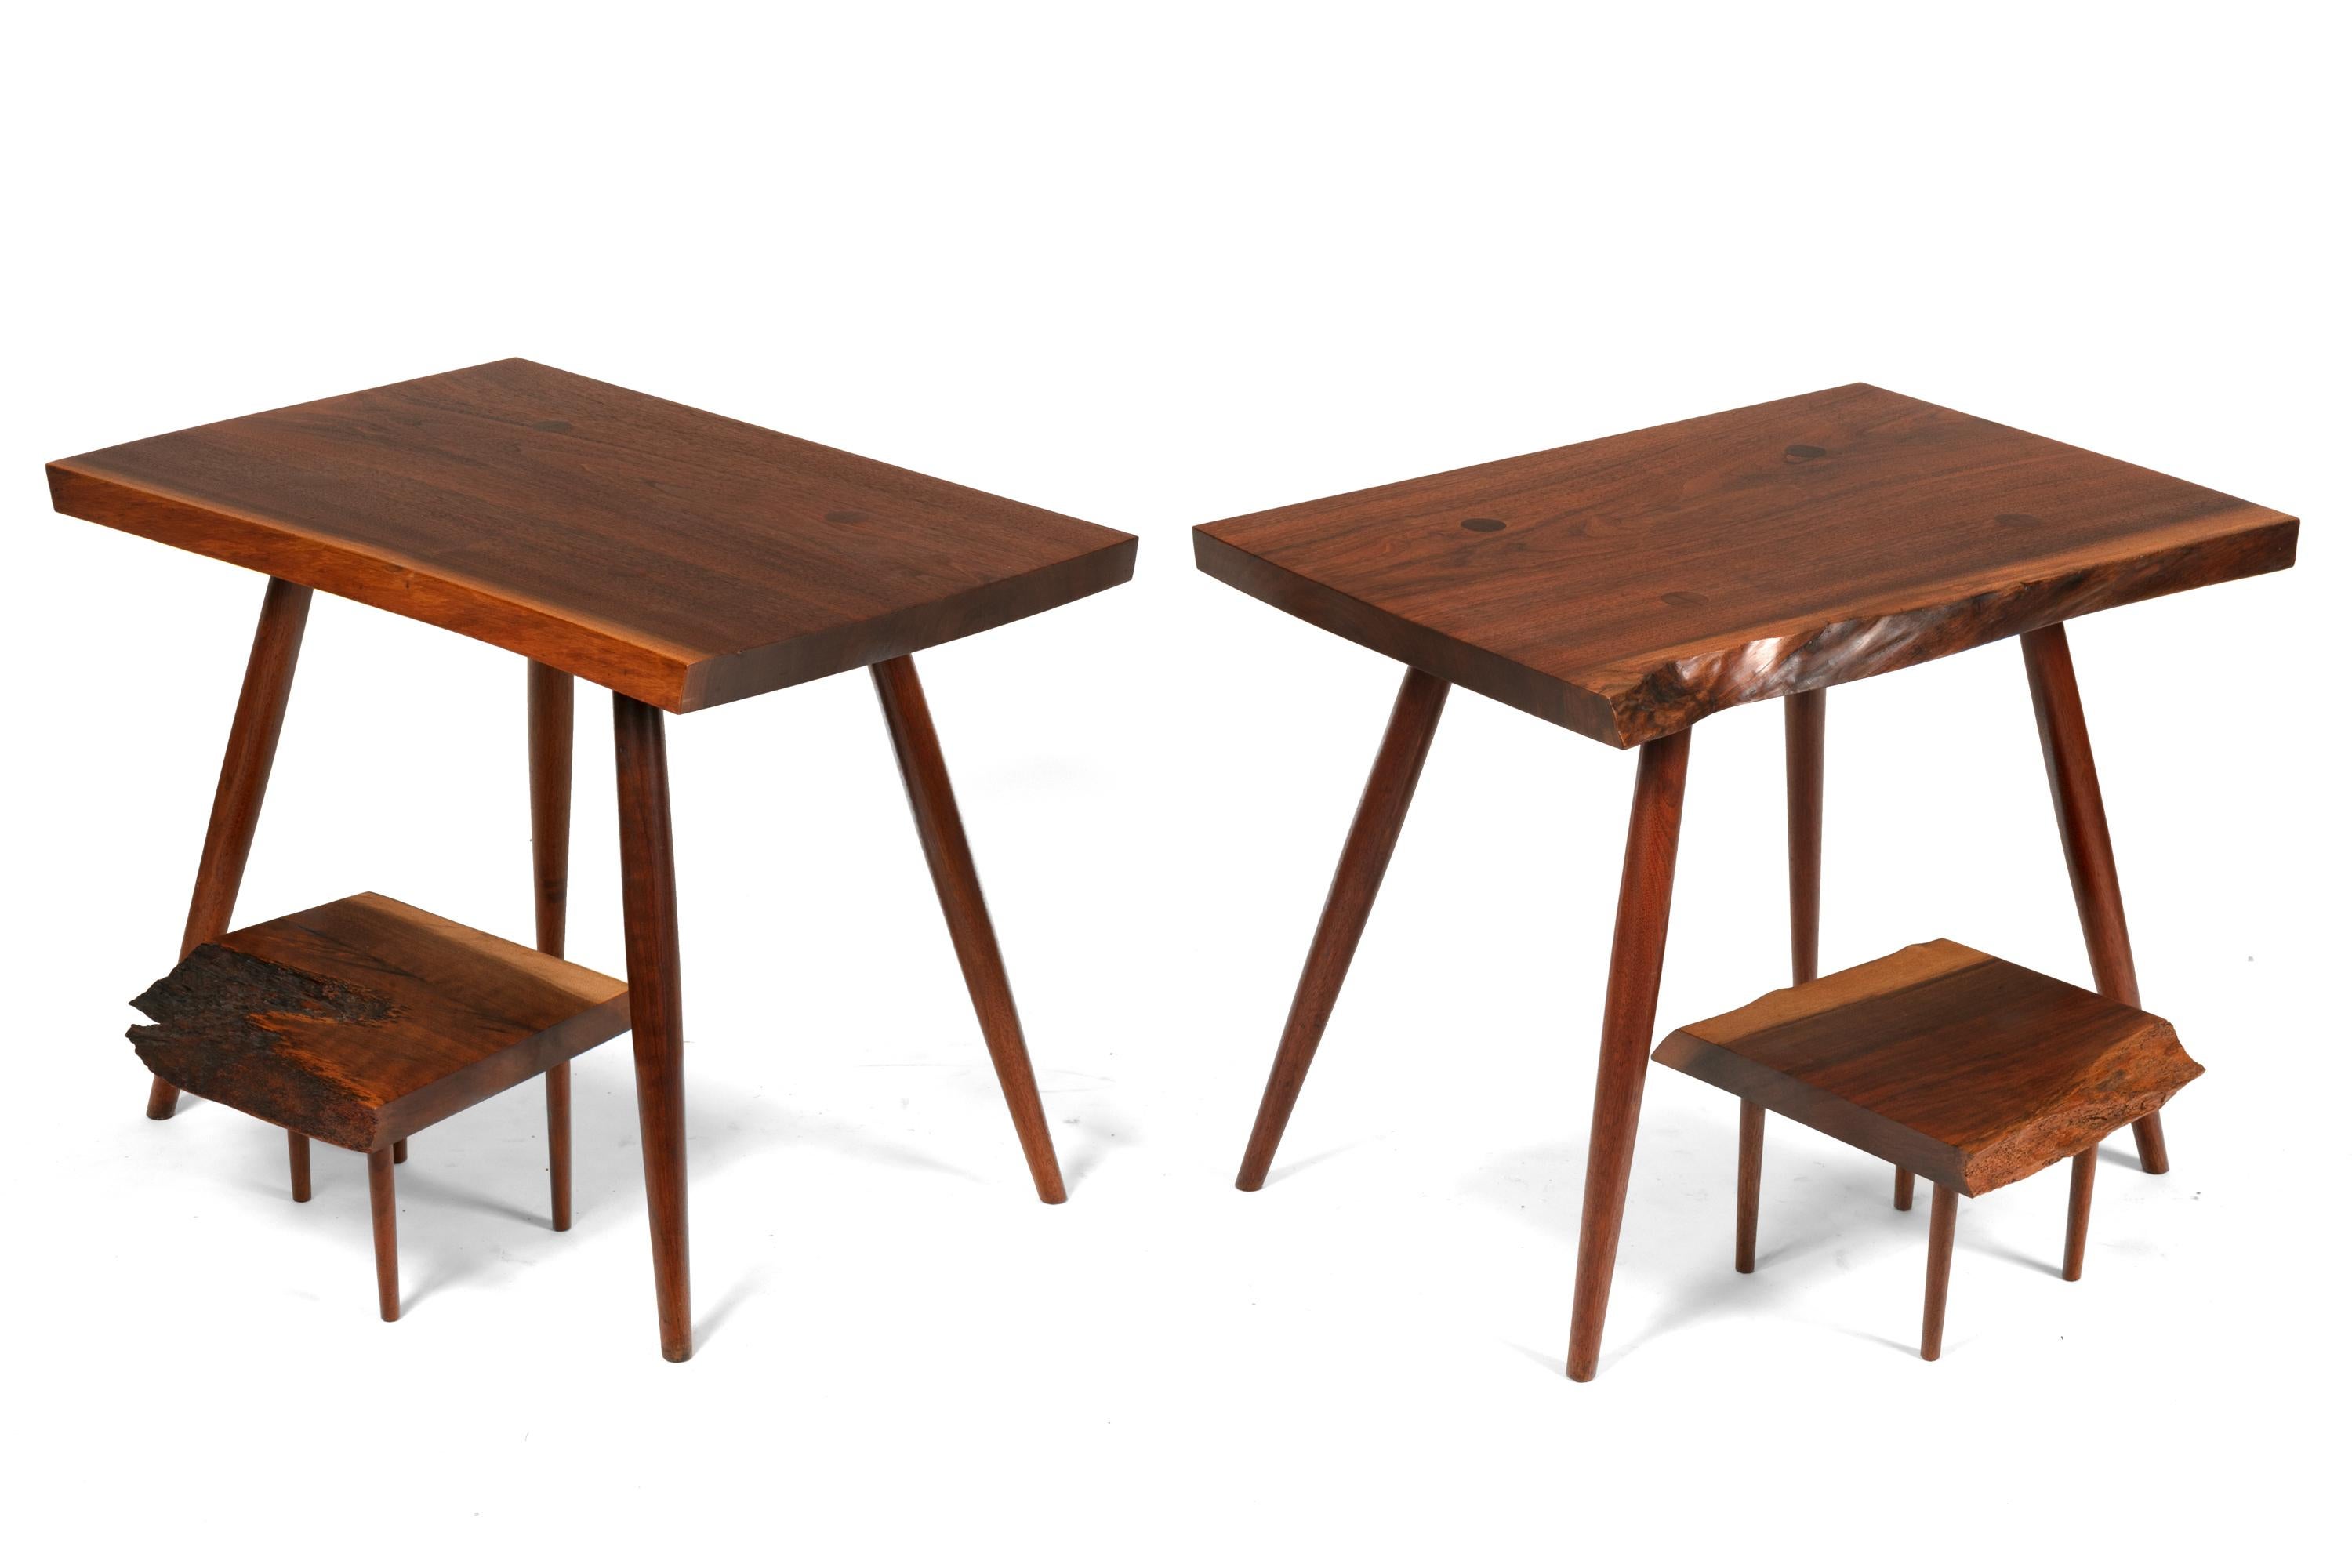 An unusually versatile pair of Nakashima tables. The second tier is free to be repositioned on the tabletop.